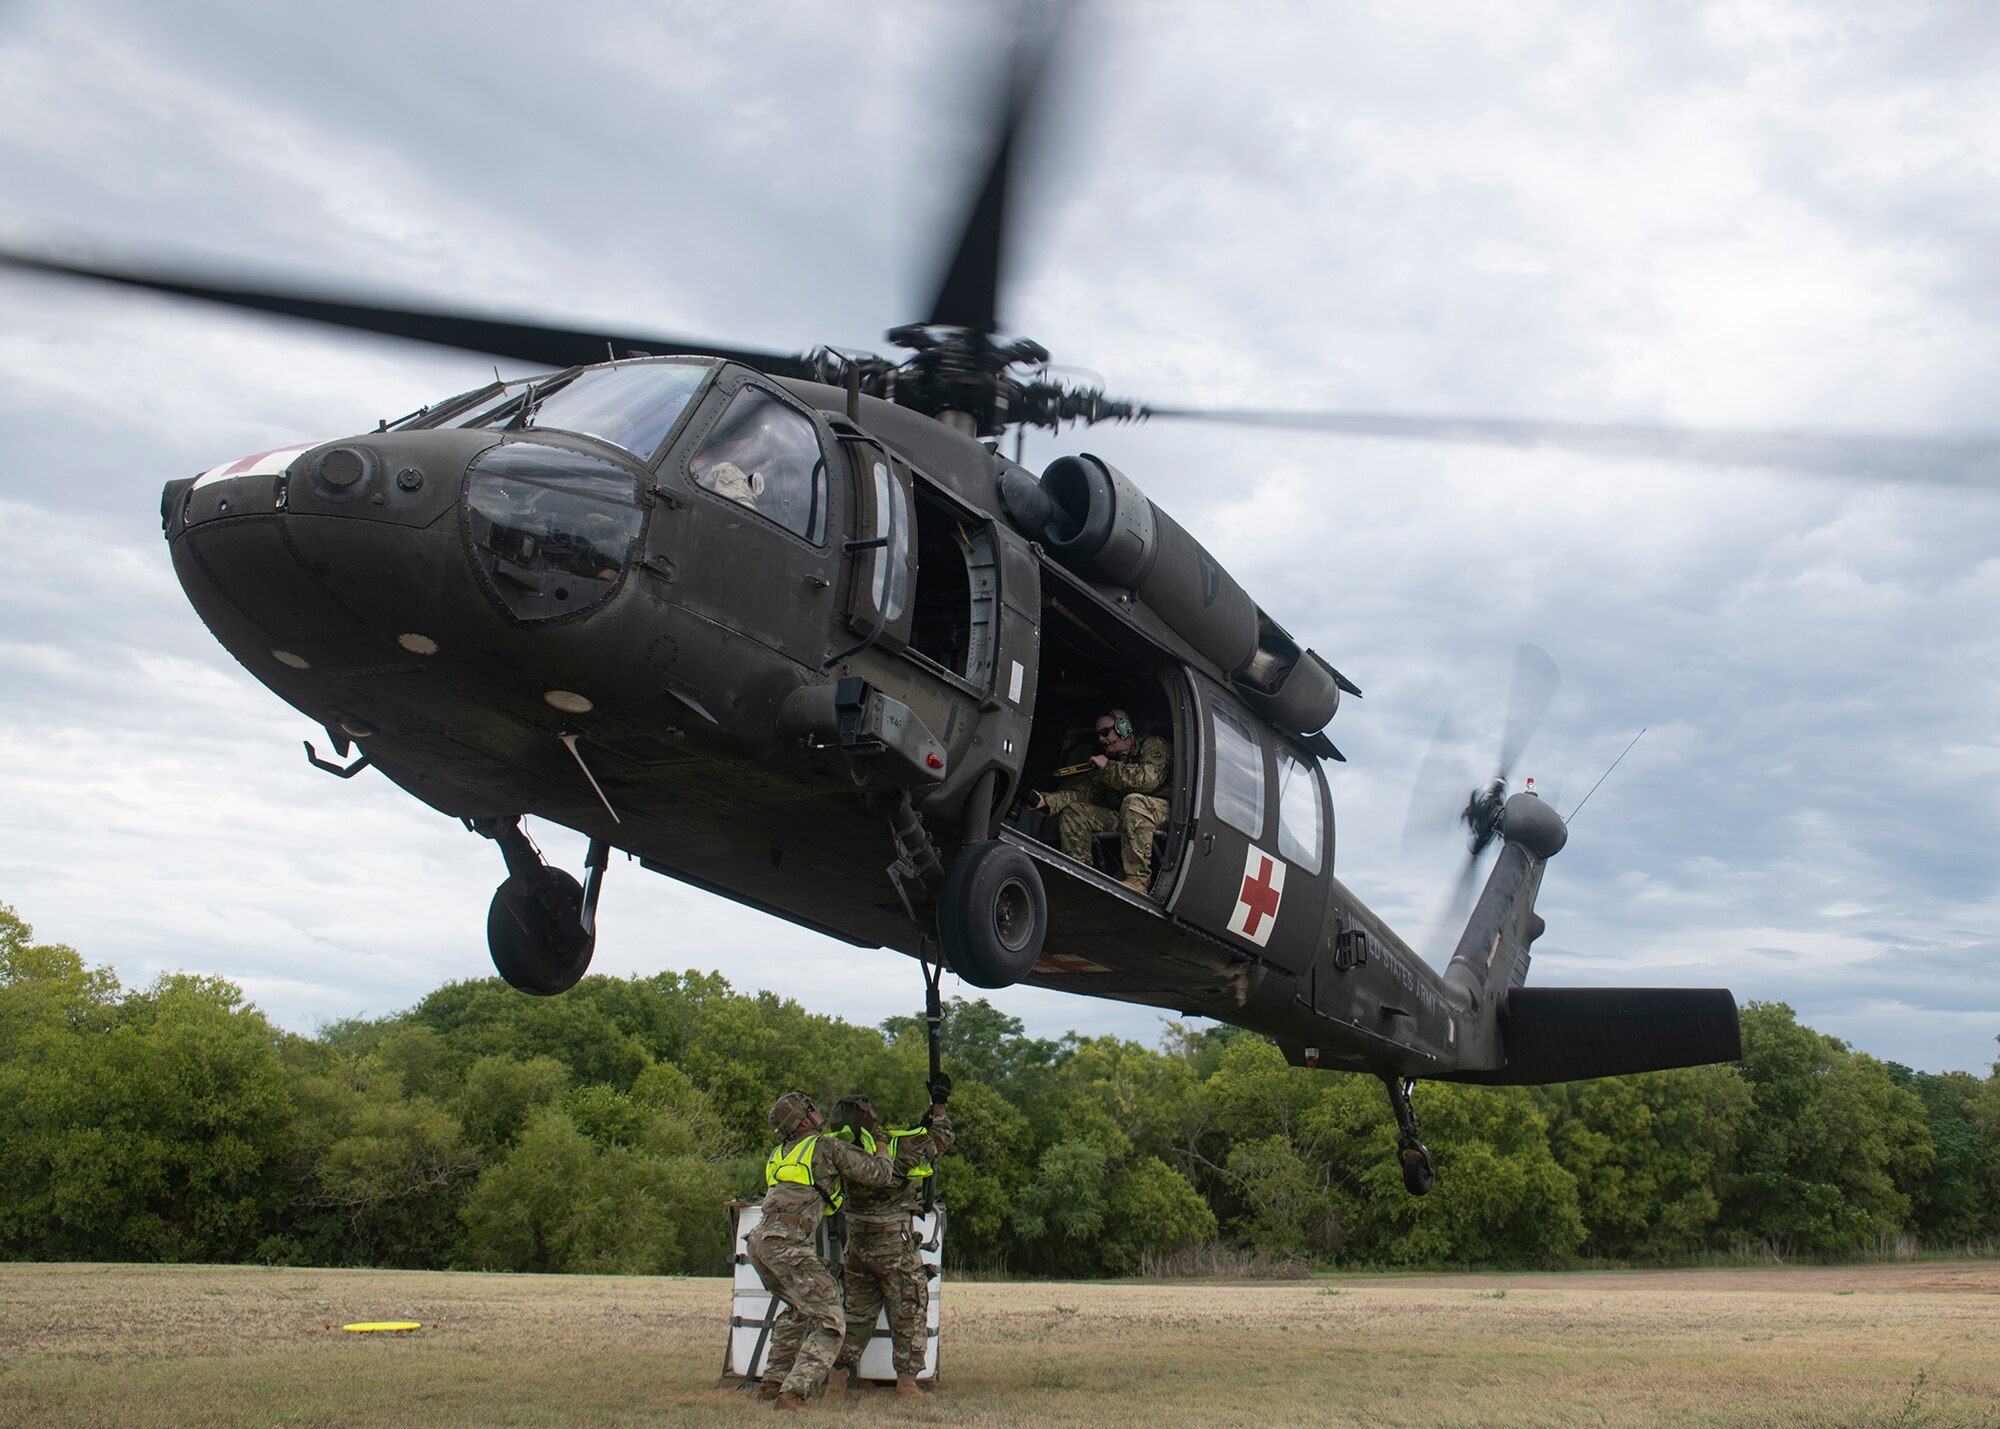 Airmen assigned to the 74th Aerial Port Squadron rig equipment to a UH-60 Black Hawk helicopter during a rigging practice mission Sept. 9 at Joint Base San Antonio-Medina.